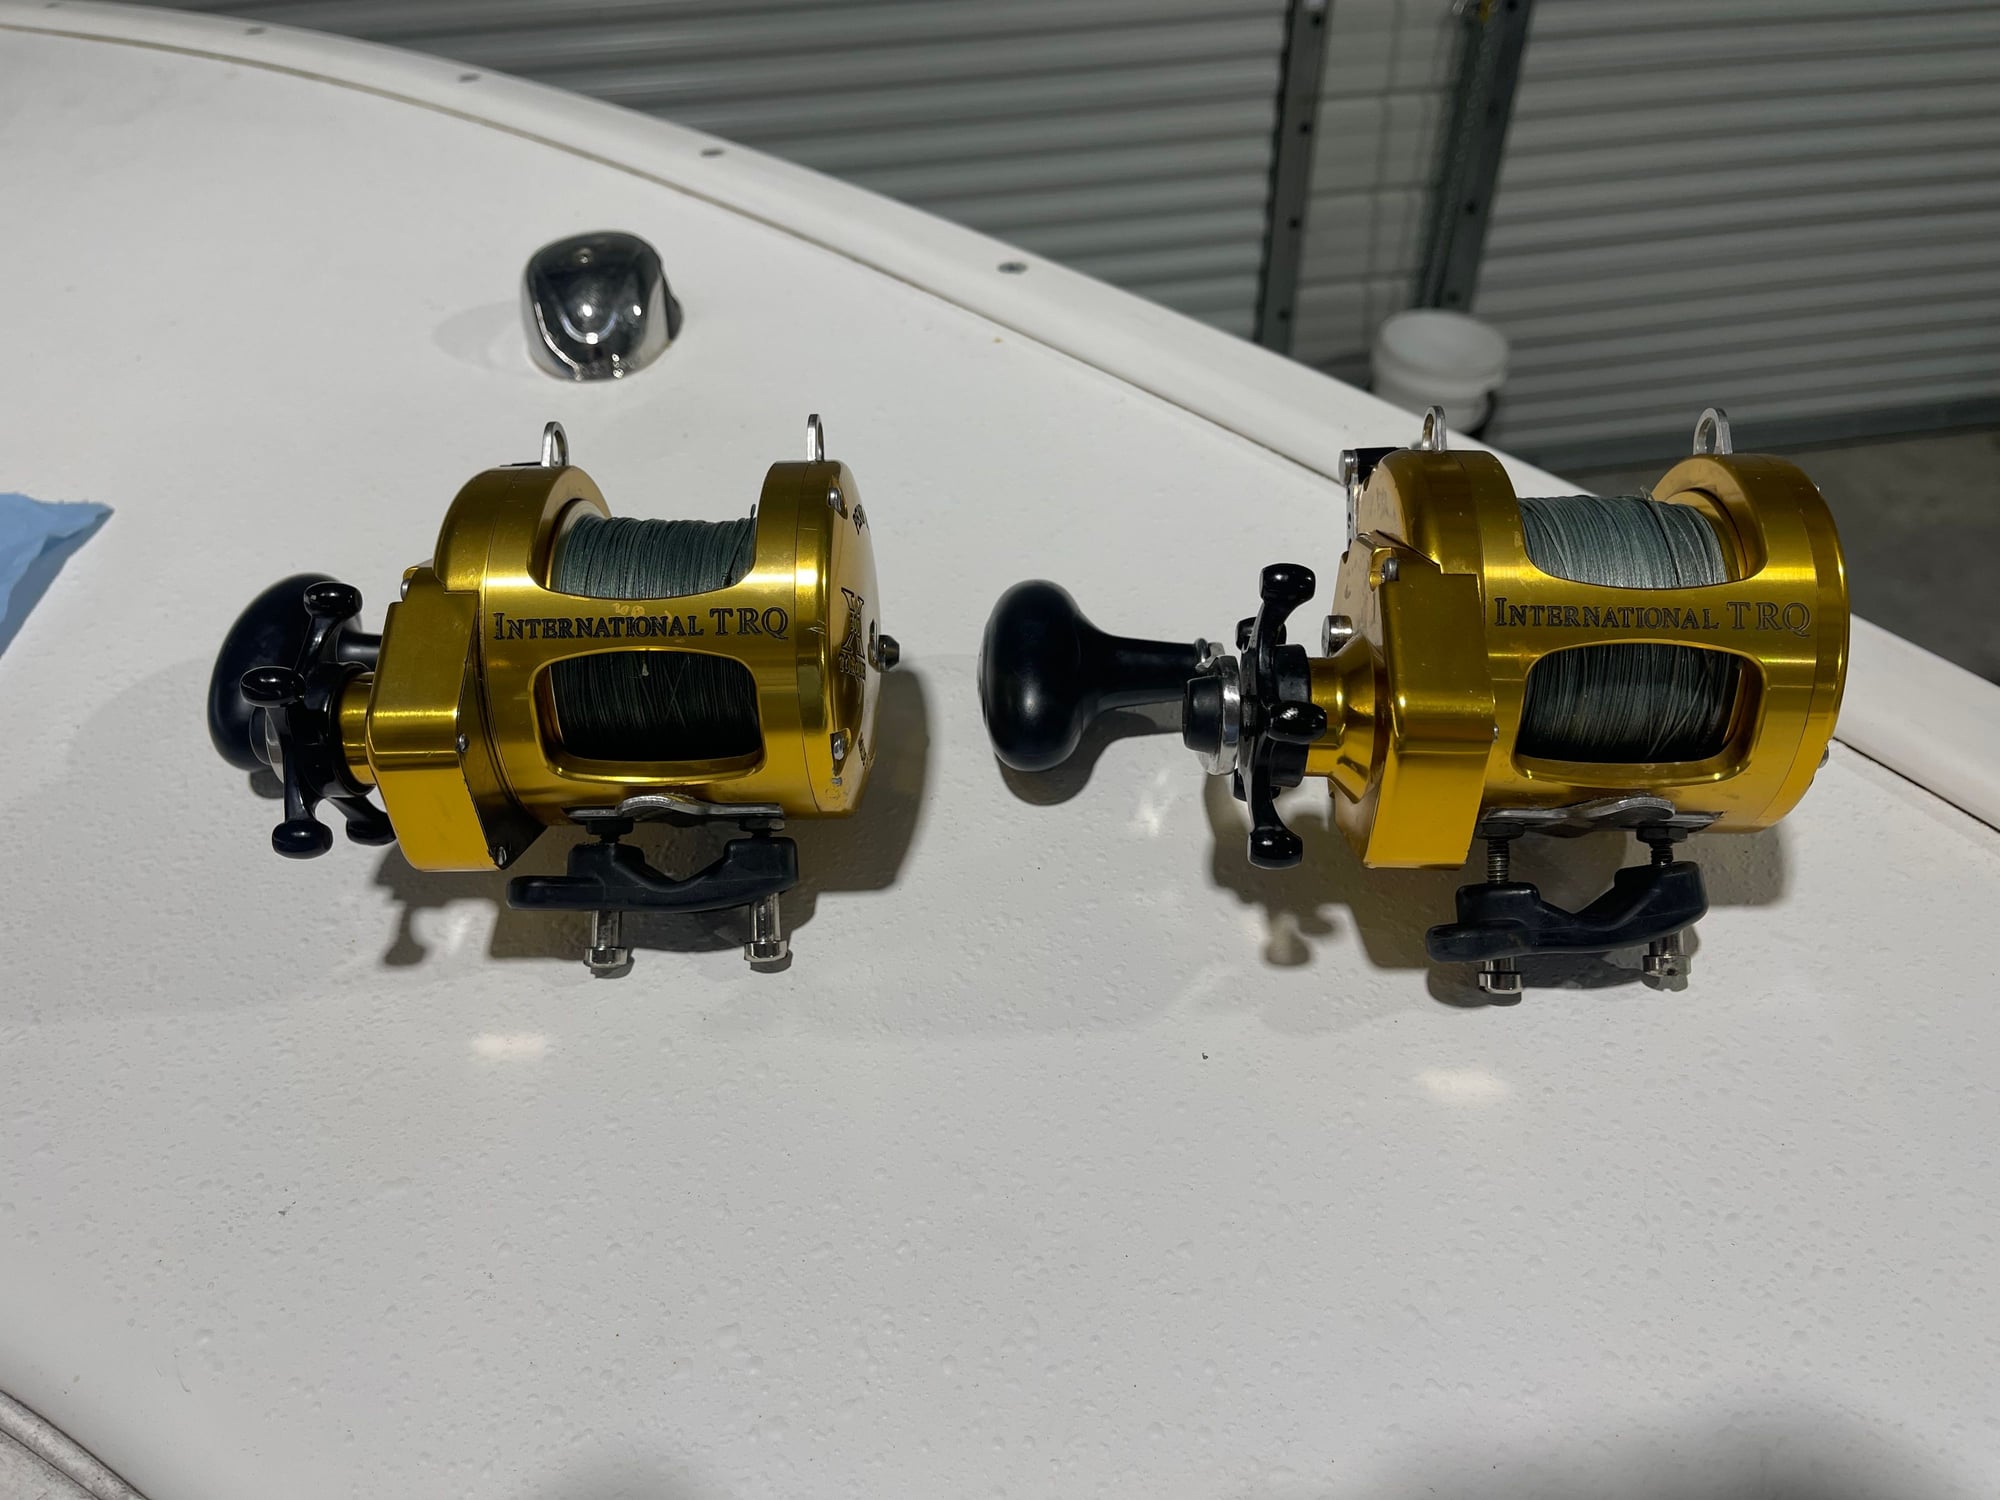 Shimano TLD 50 Penn torque 300x - The Hull Truth - Boating and